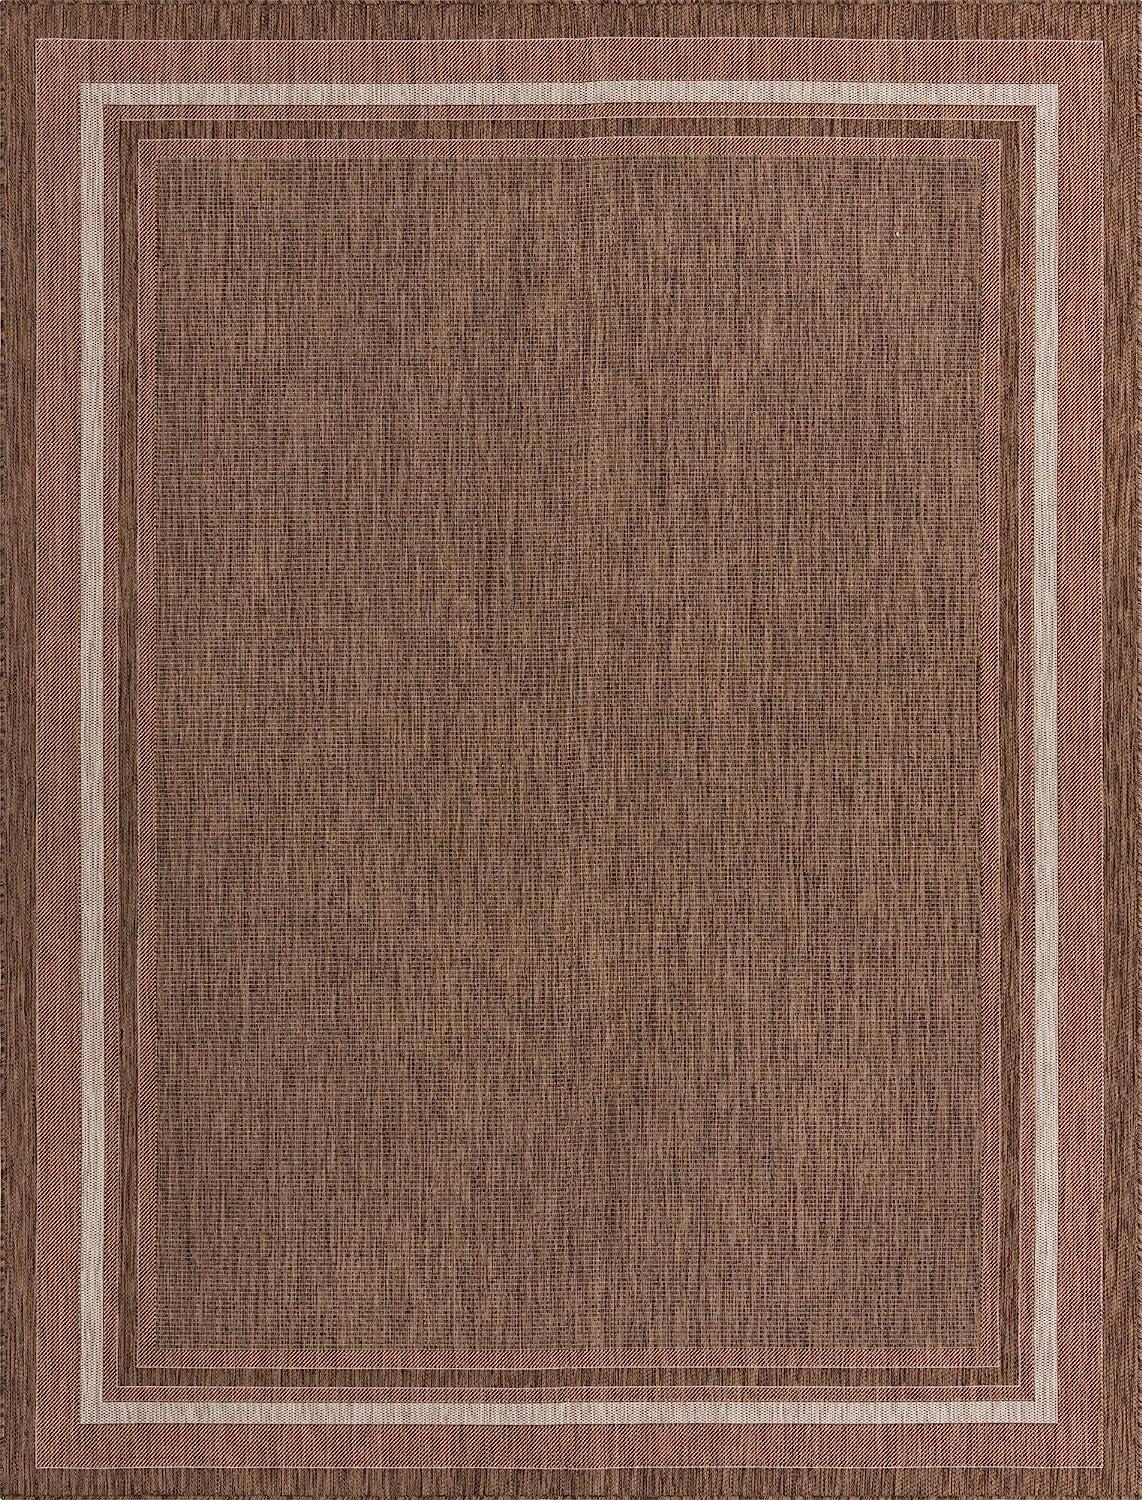 Outdoor Collection Transitional Indoor and Outdoor Casual Solid Tonal Border Area Rug, Rectangular , Brown/Ivory